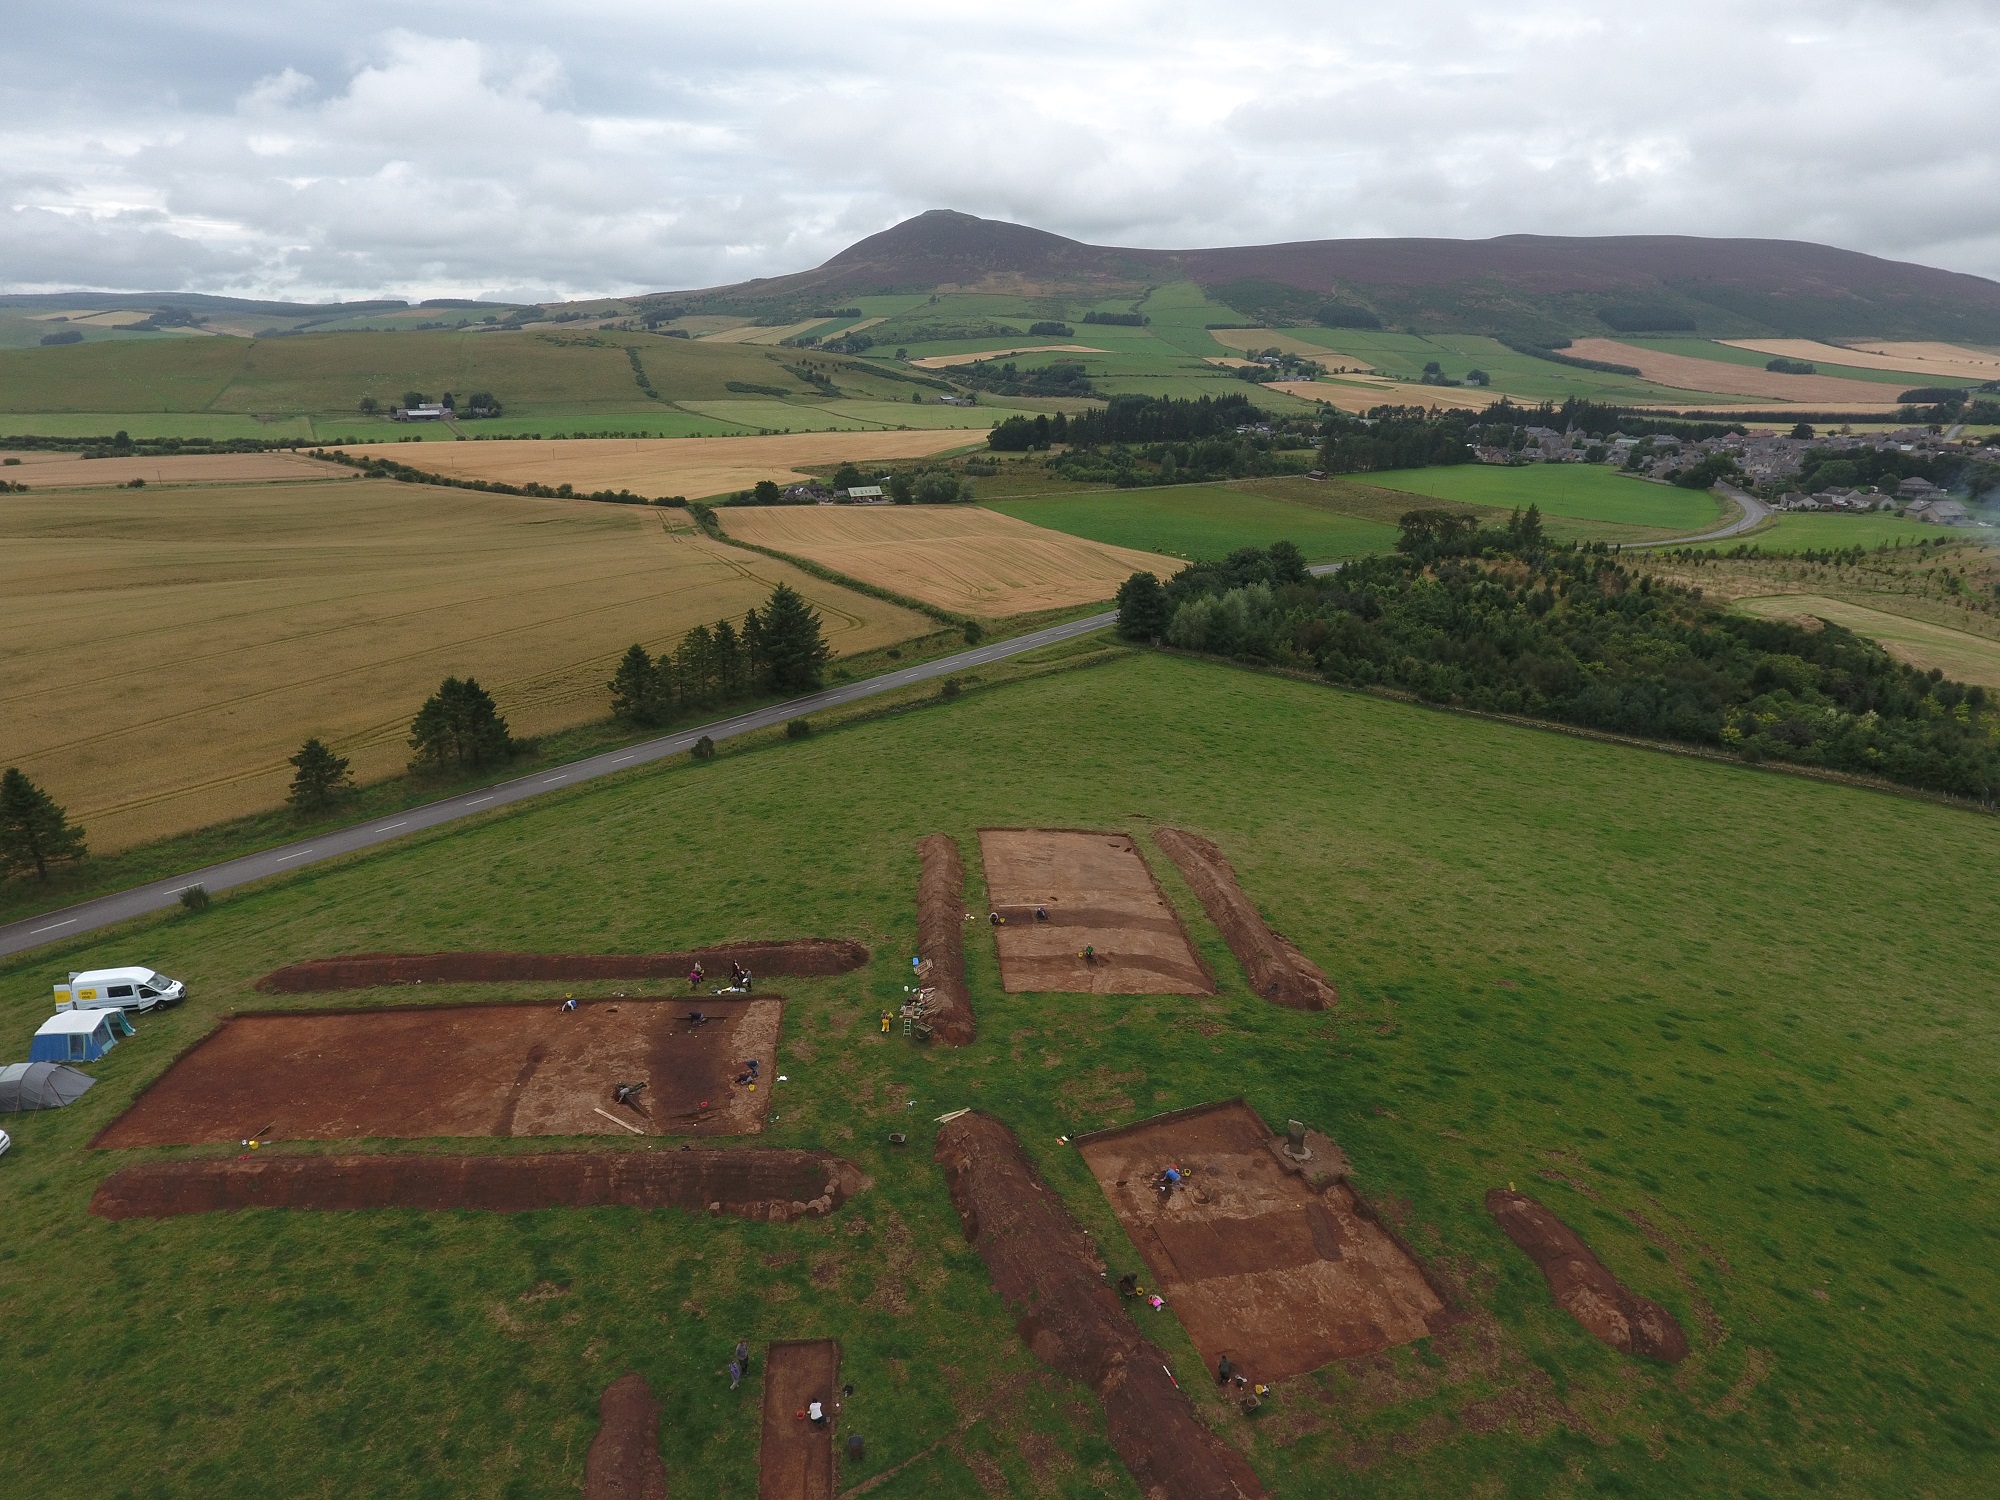 Fieldwork at Rhynie in 2016. The boundaries of the high status enclosure complex at Rhynie can be seen in the trenches – centuries of ploughing have flattened the ditches and wooden walls that encompassed the Pictish site